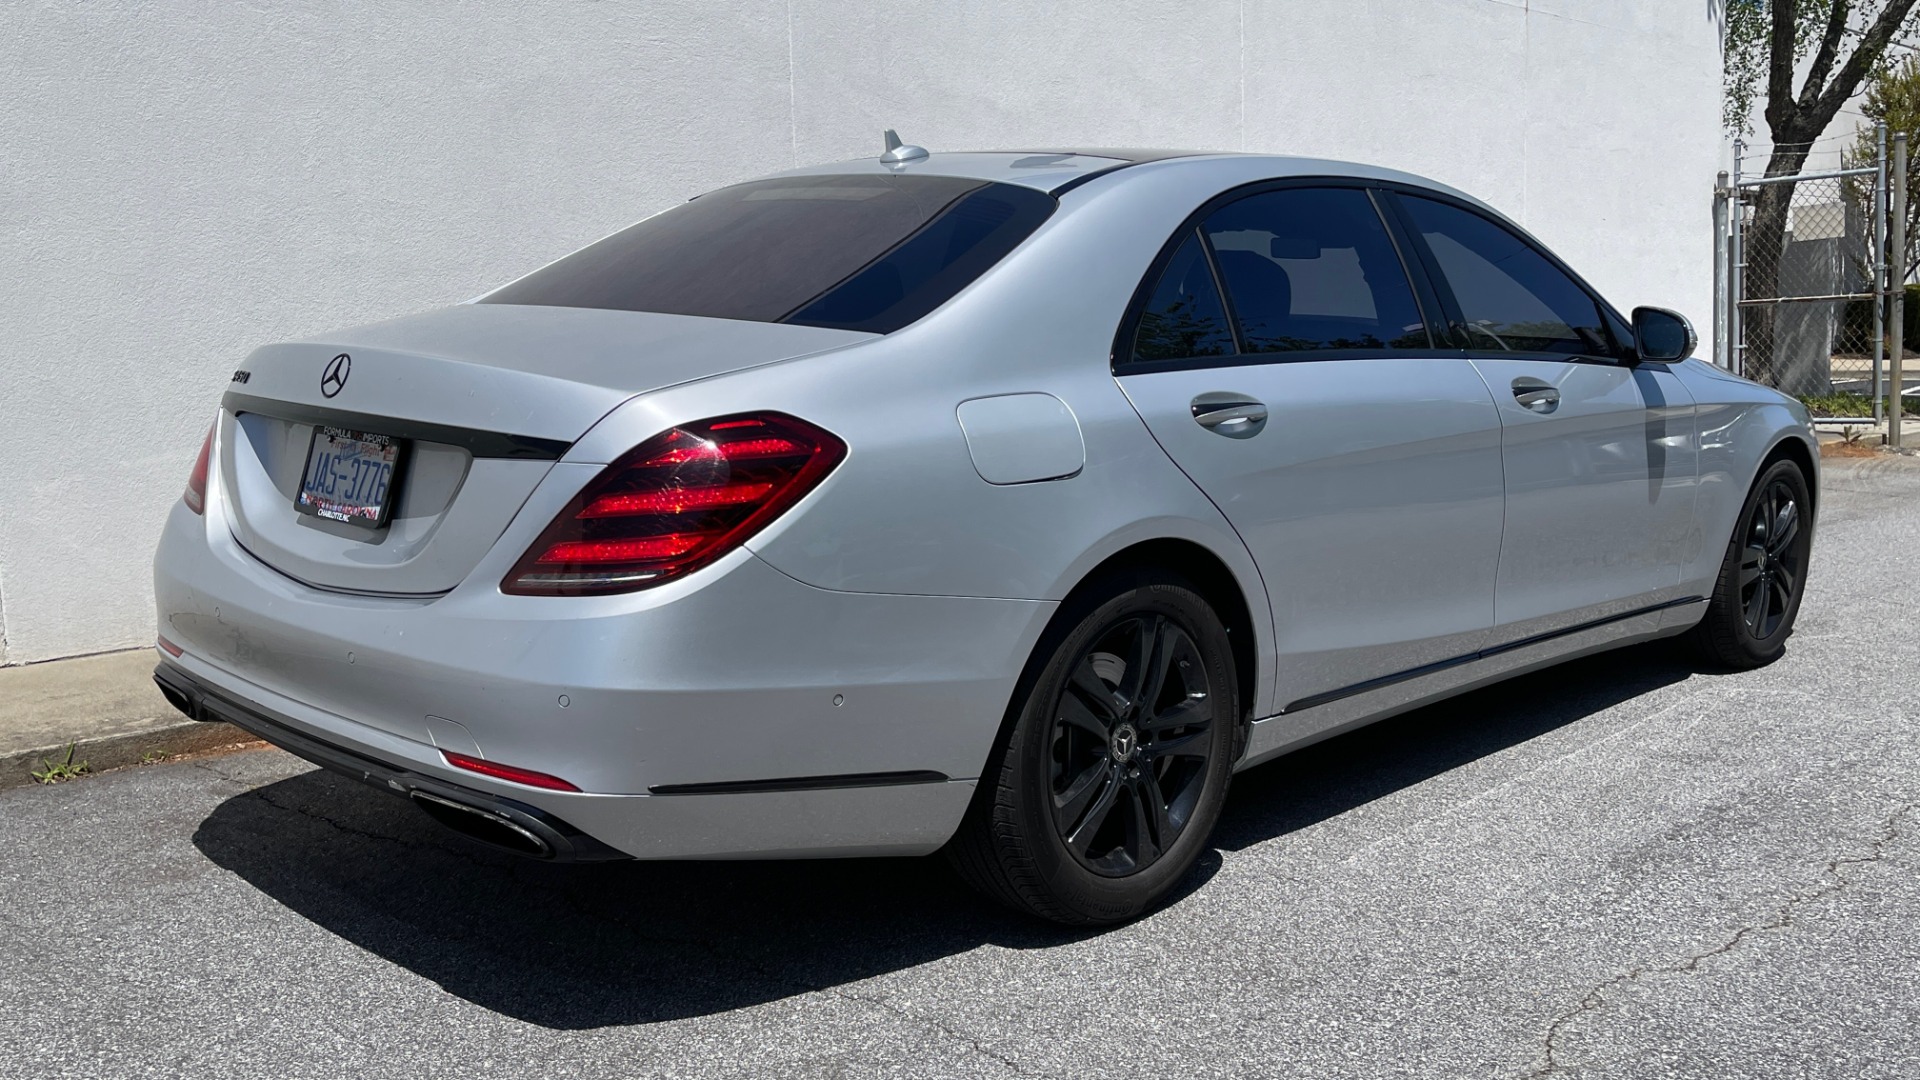 Used 2018 Mercedes-Benz S-CLASS S 450 3.0L SEDAN 362HP / PREMIUM / SUNROOF / SURROUND VIEW for sale $54,995 at Formula Imports in Charlotte NC 28227 2